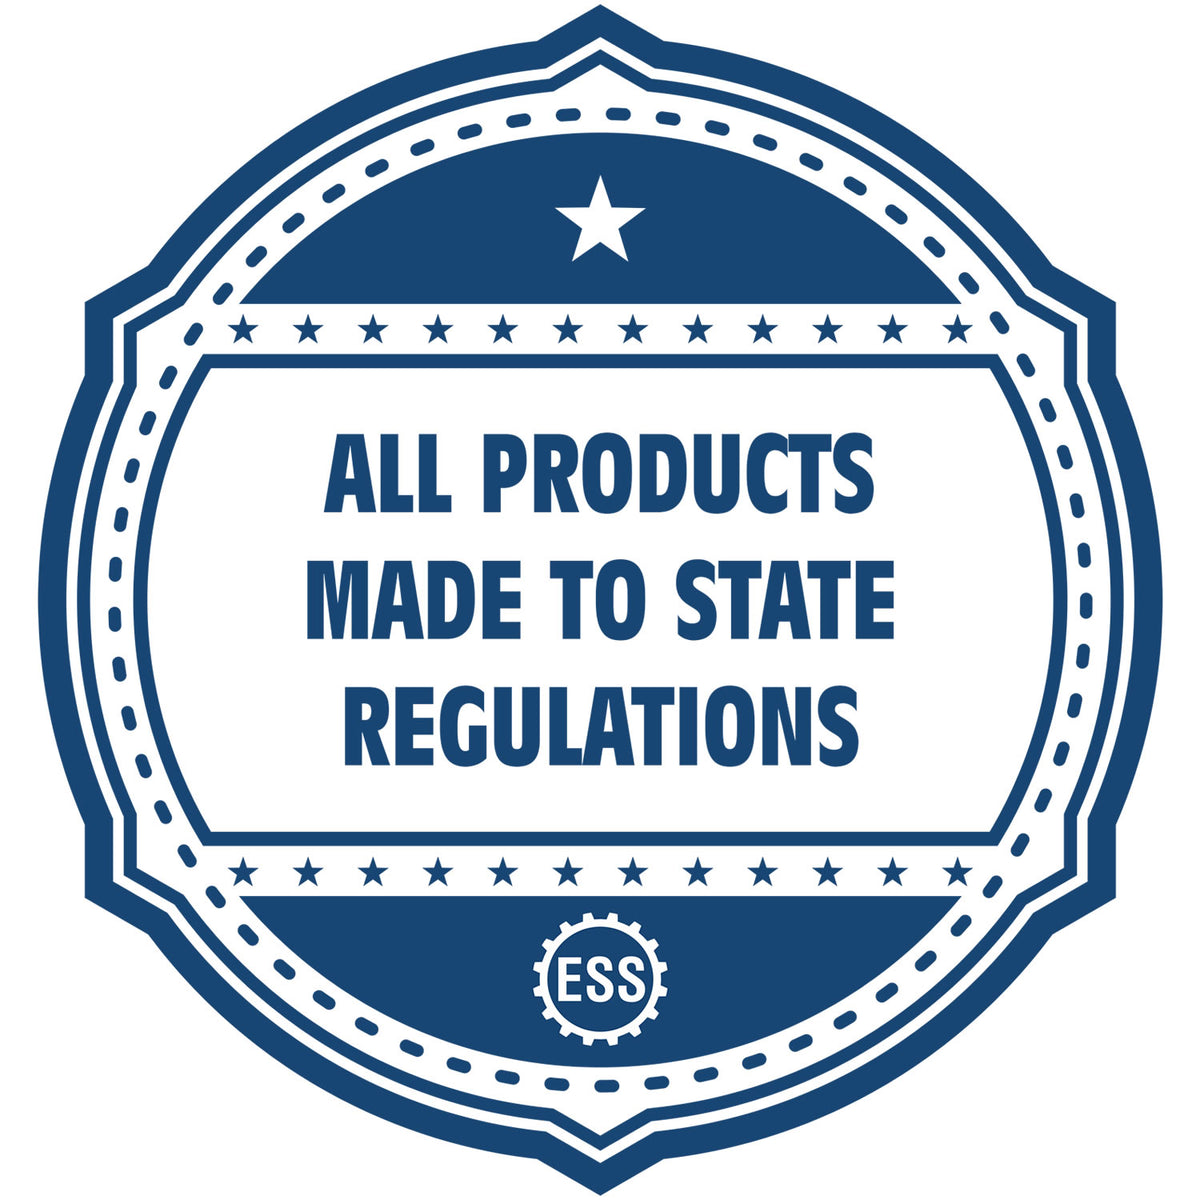 An icon or badge element for the Handheld Kentucky Professional Engineer Embosser showing that this product is made in compliance with state regulations.